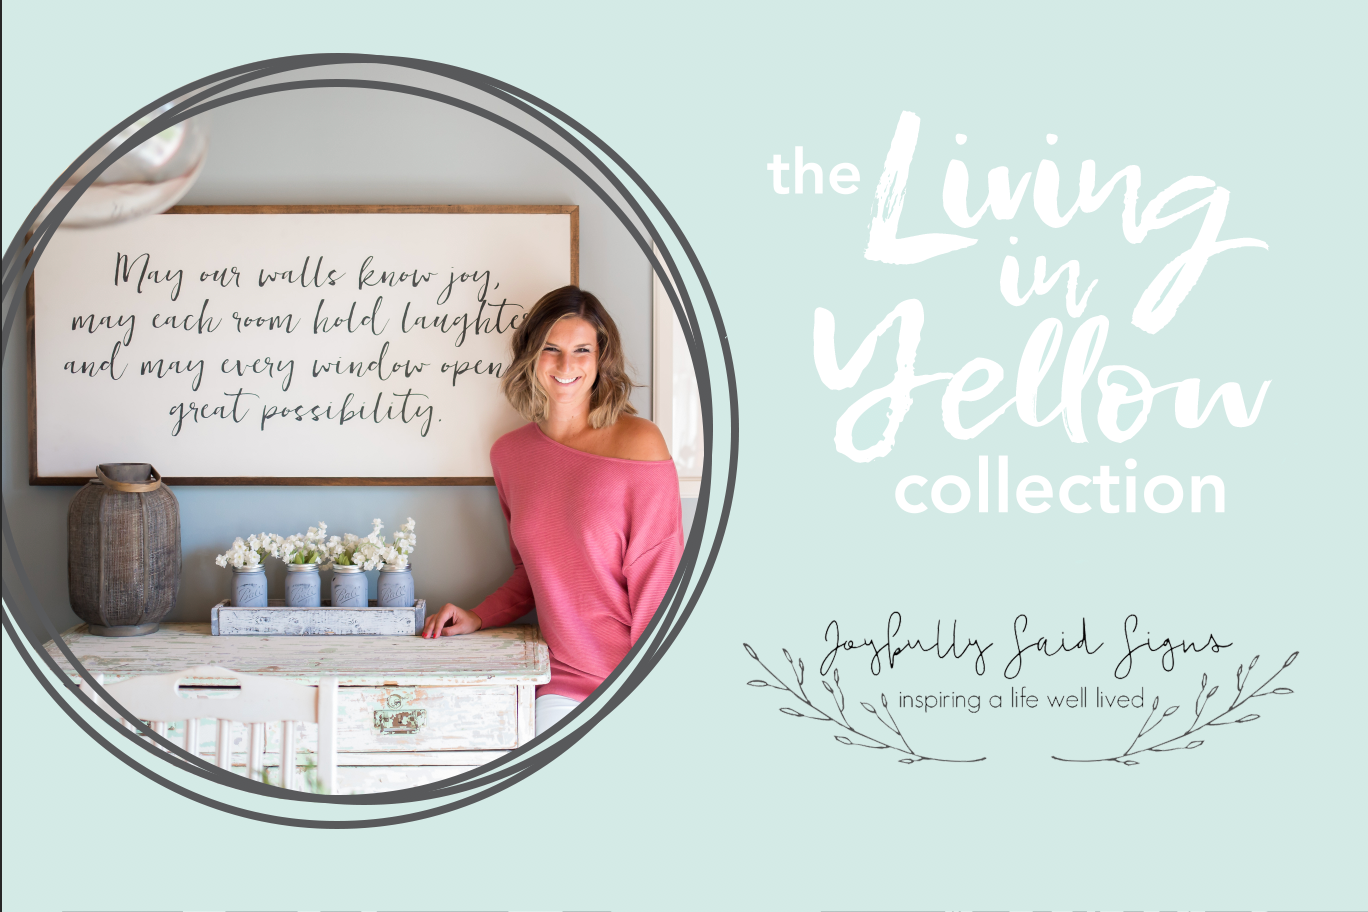 Introducing the Living in Yellow Collection!